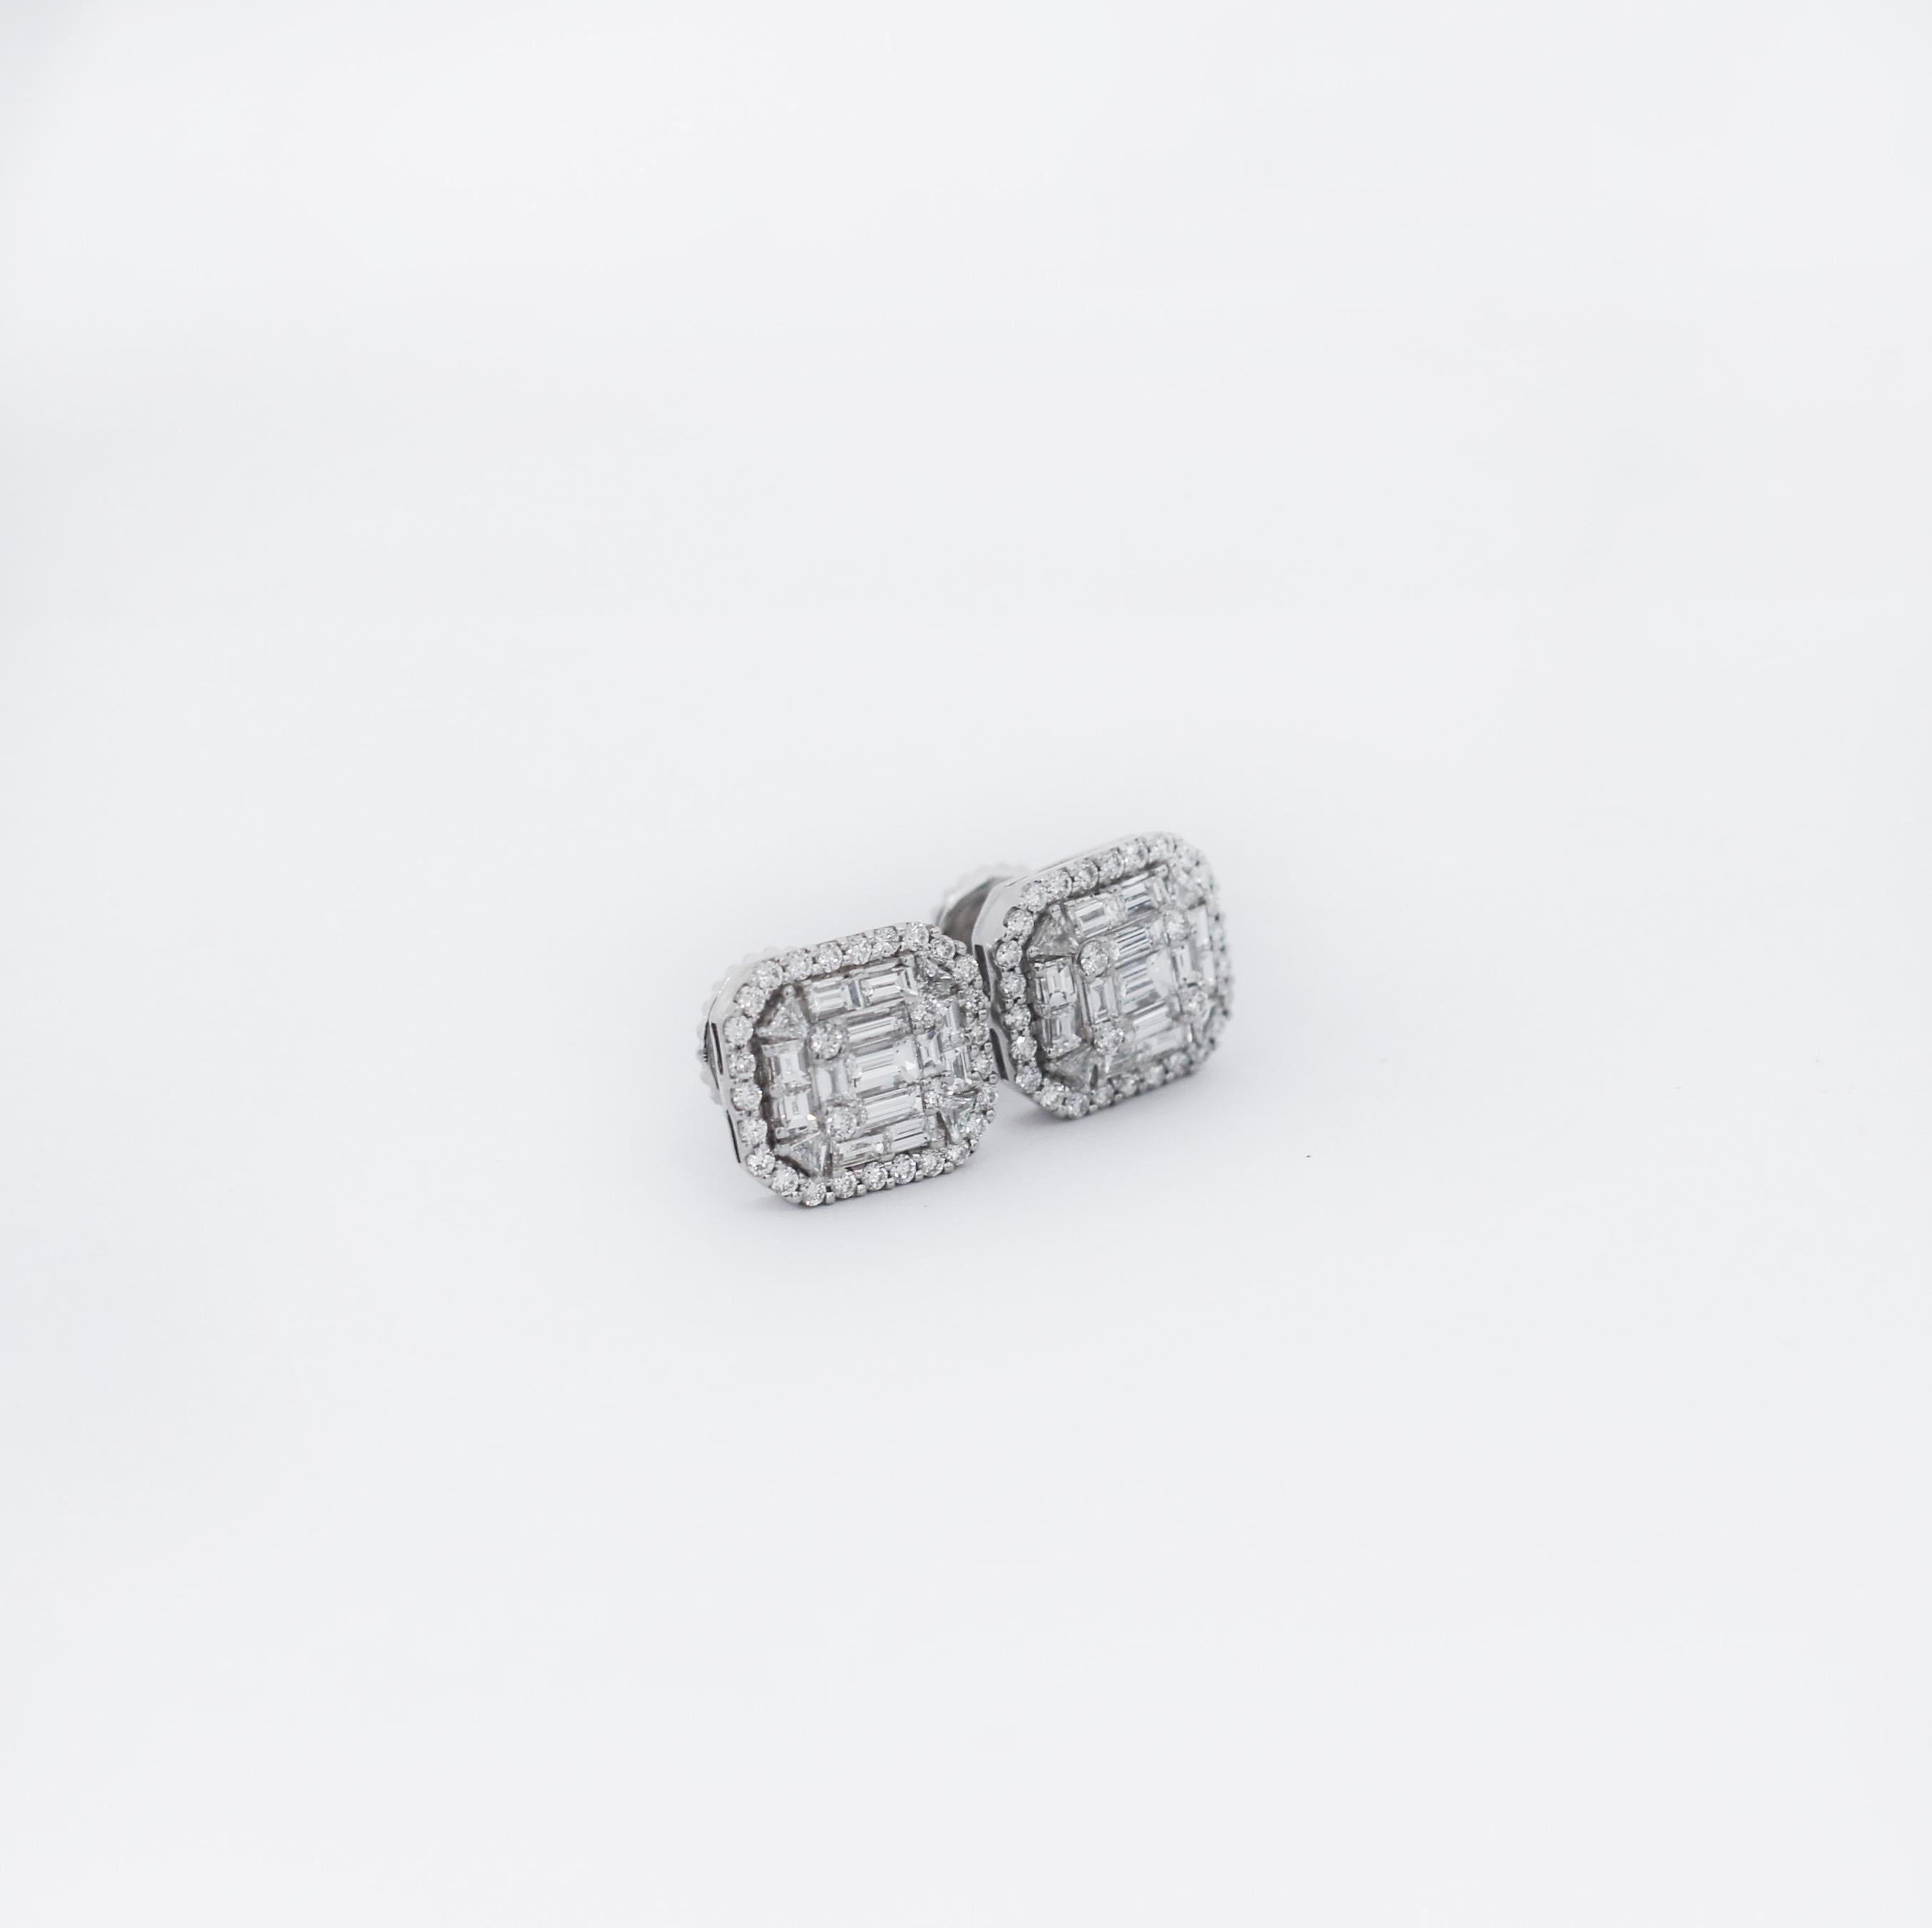 Beautiful Classic Earrings
18K White Gold
Diamond Cluster
nicely arranged
Round and baguette cut 
Approx. measurements: .50